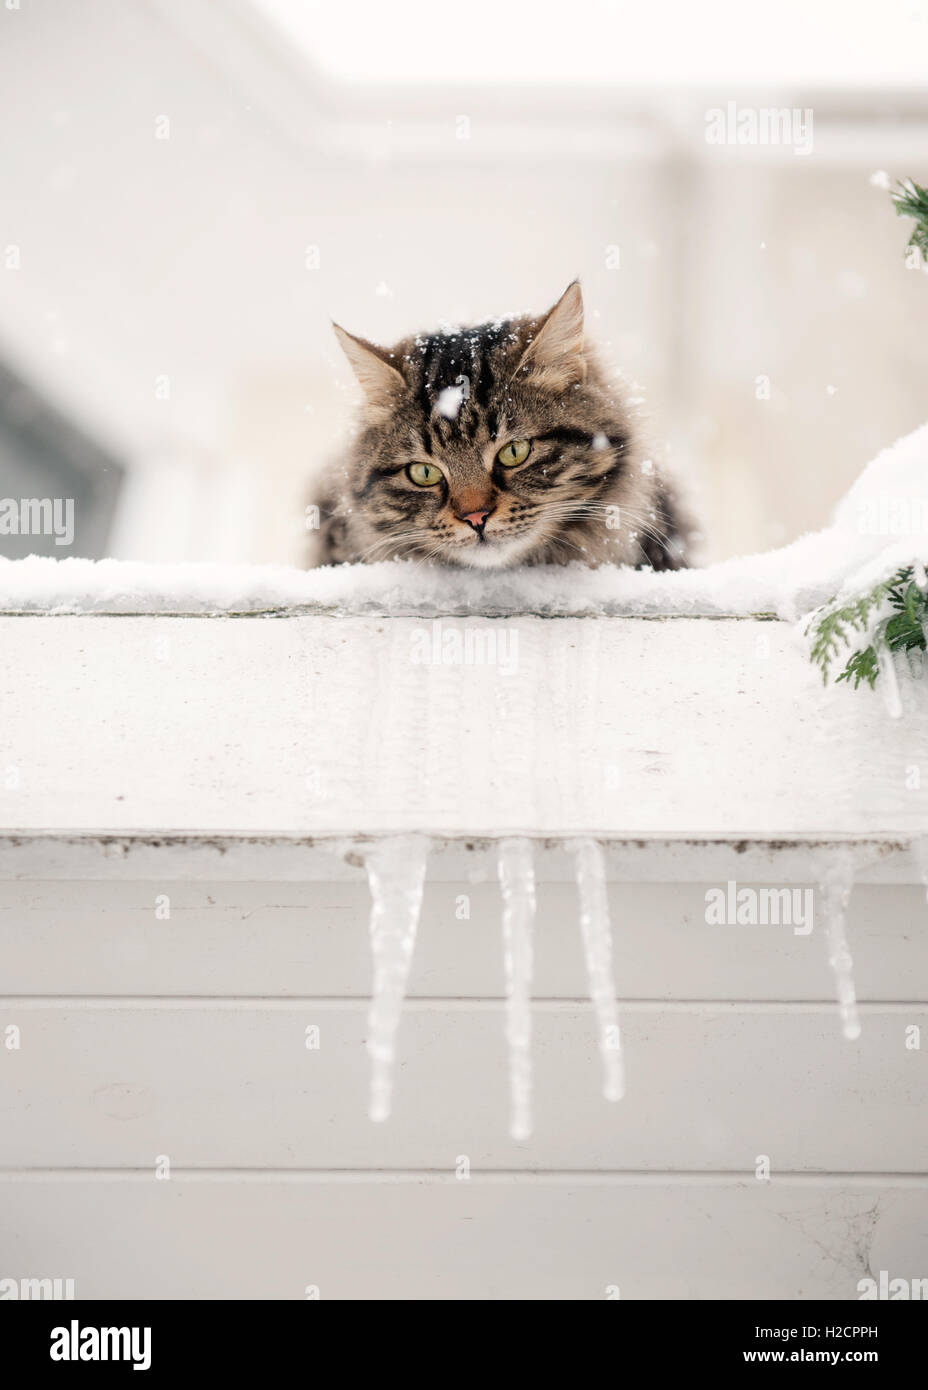 Fluffy tabby cat in snow,Istanbul Foto Stock